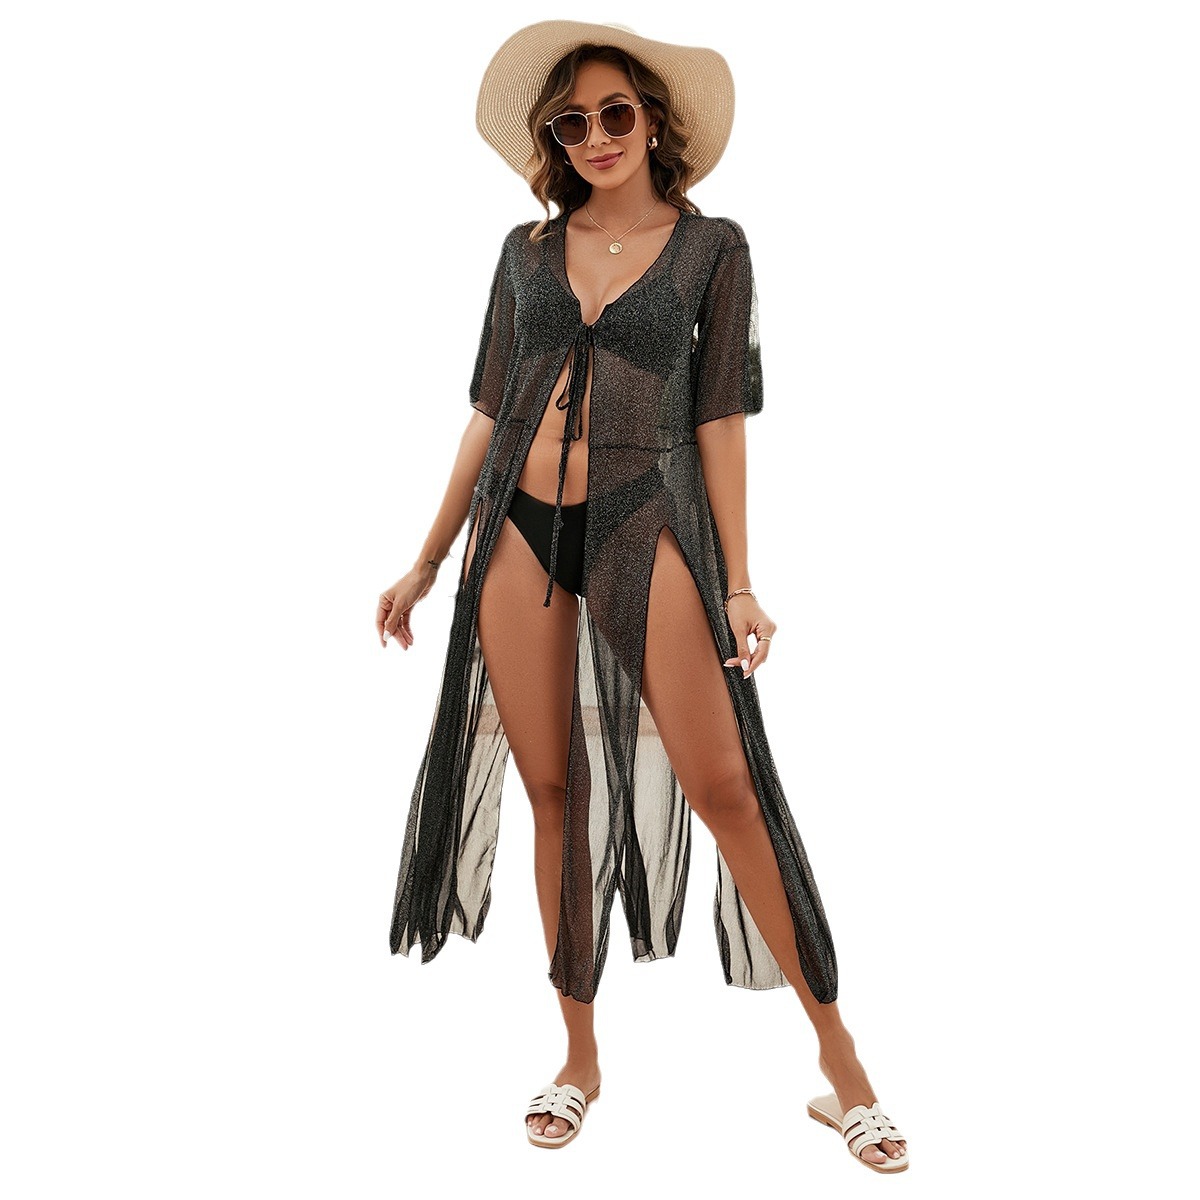 648--New beach cover-up sexy lace see-through cardigan sun protection shirt